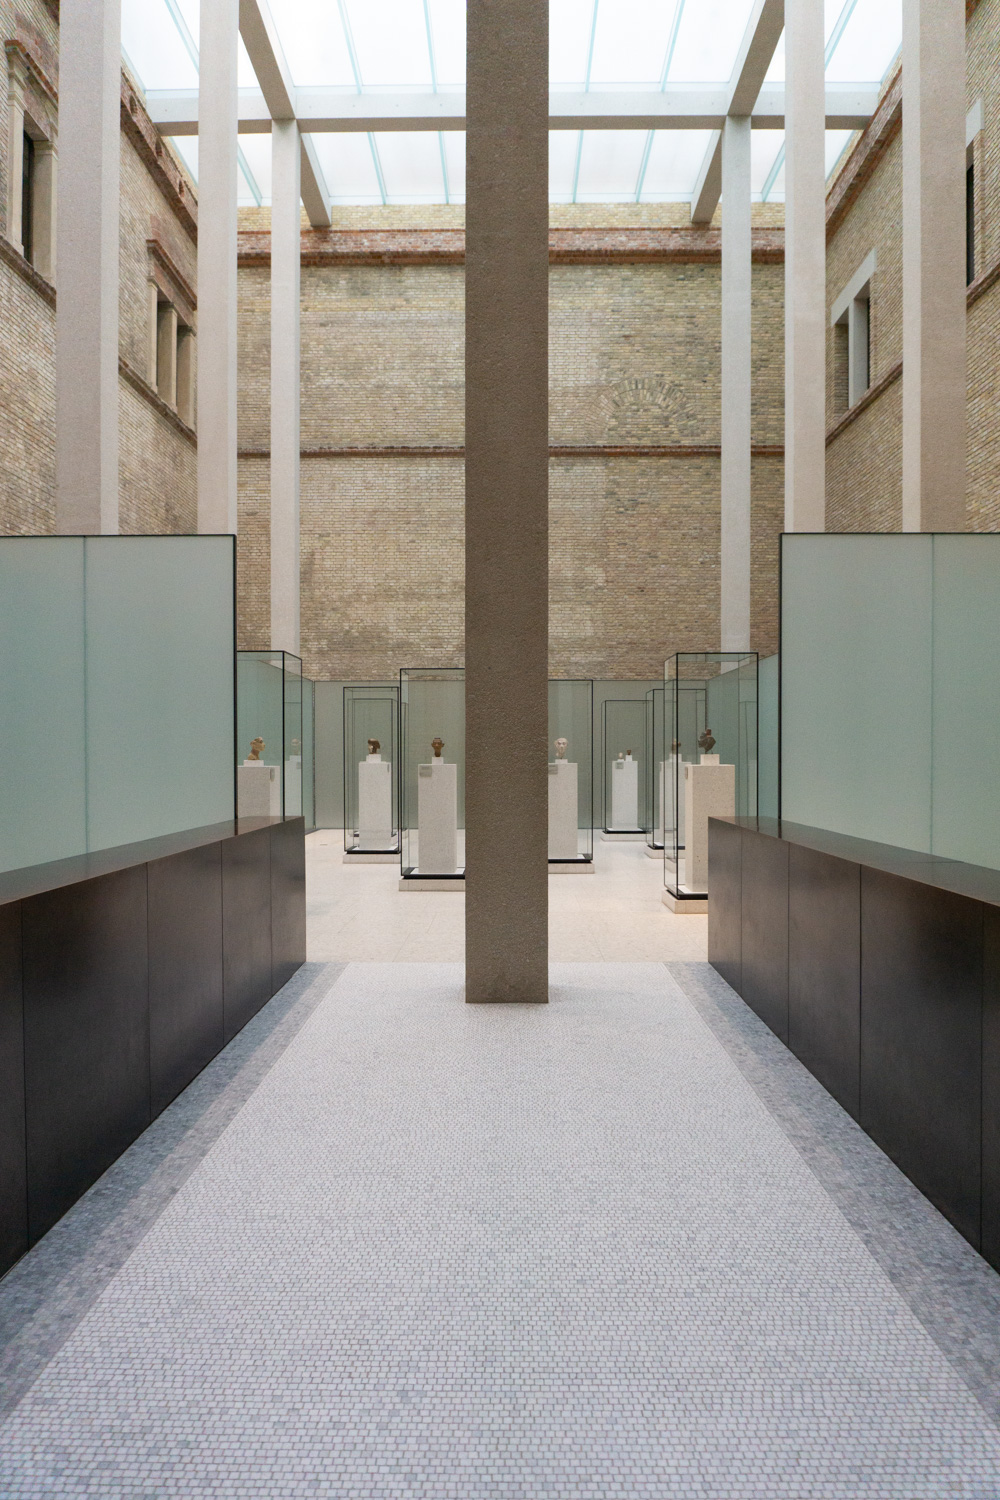 Neues Museum | Berlin Travle Guide | Art, History & Architecture Museum Island | City Photography | Neutral Aesthetic - RG Daily